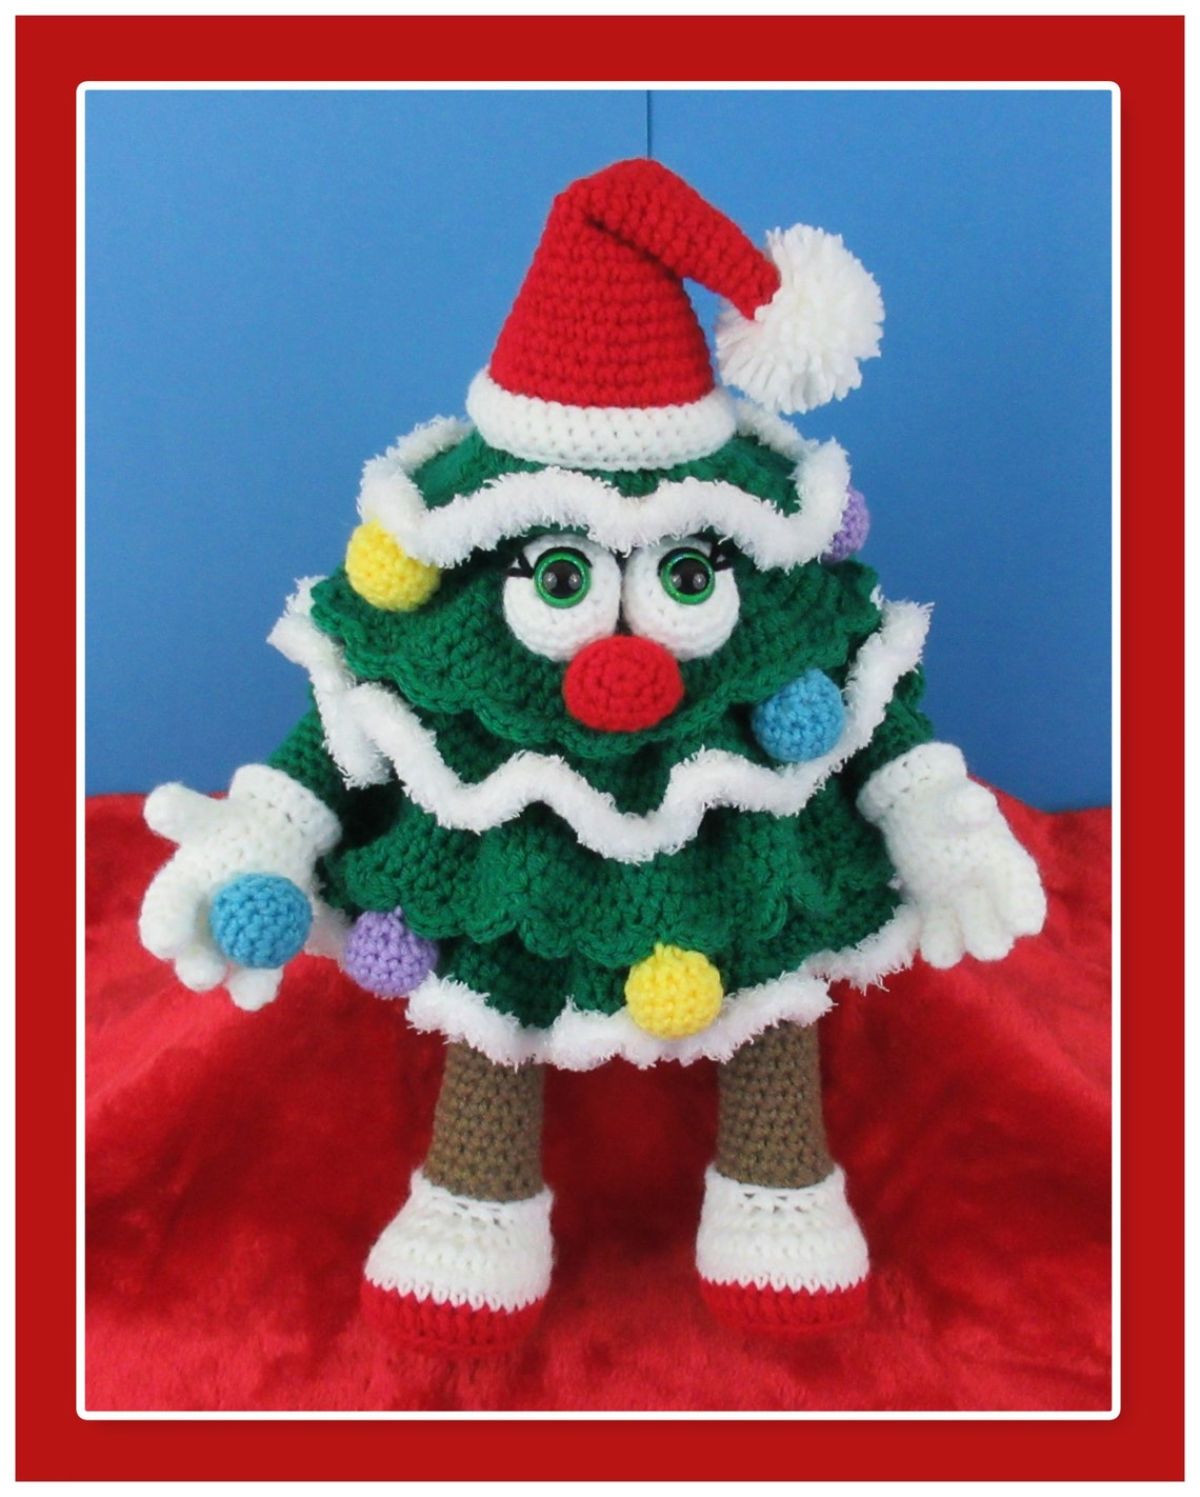 A large green crochet Christmas tree with white edges, white hands, and brown legs wearing a Santa hat and red shoes.